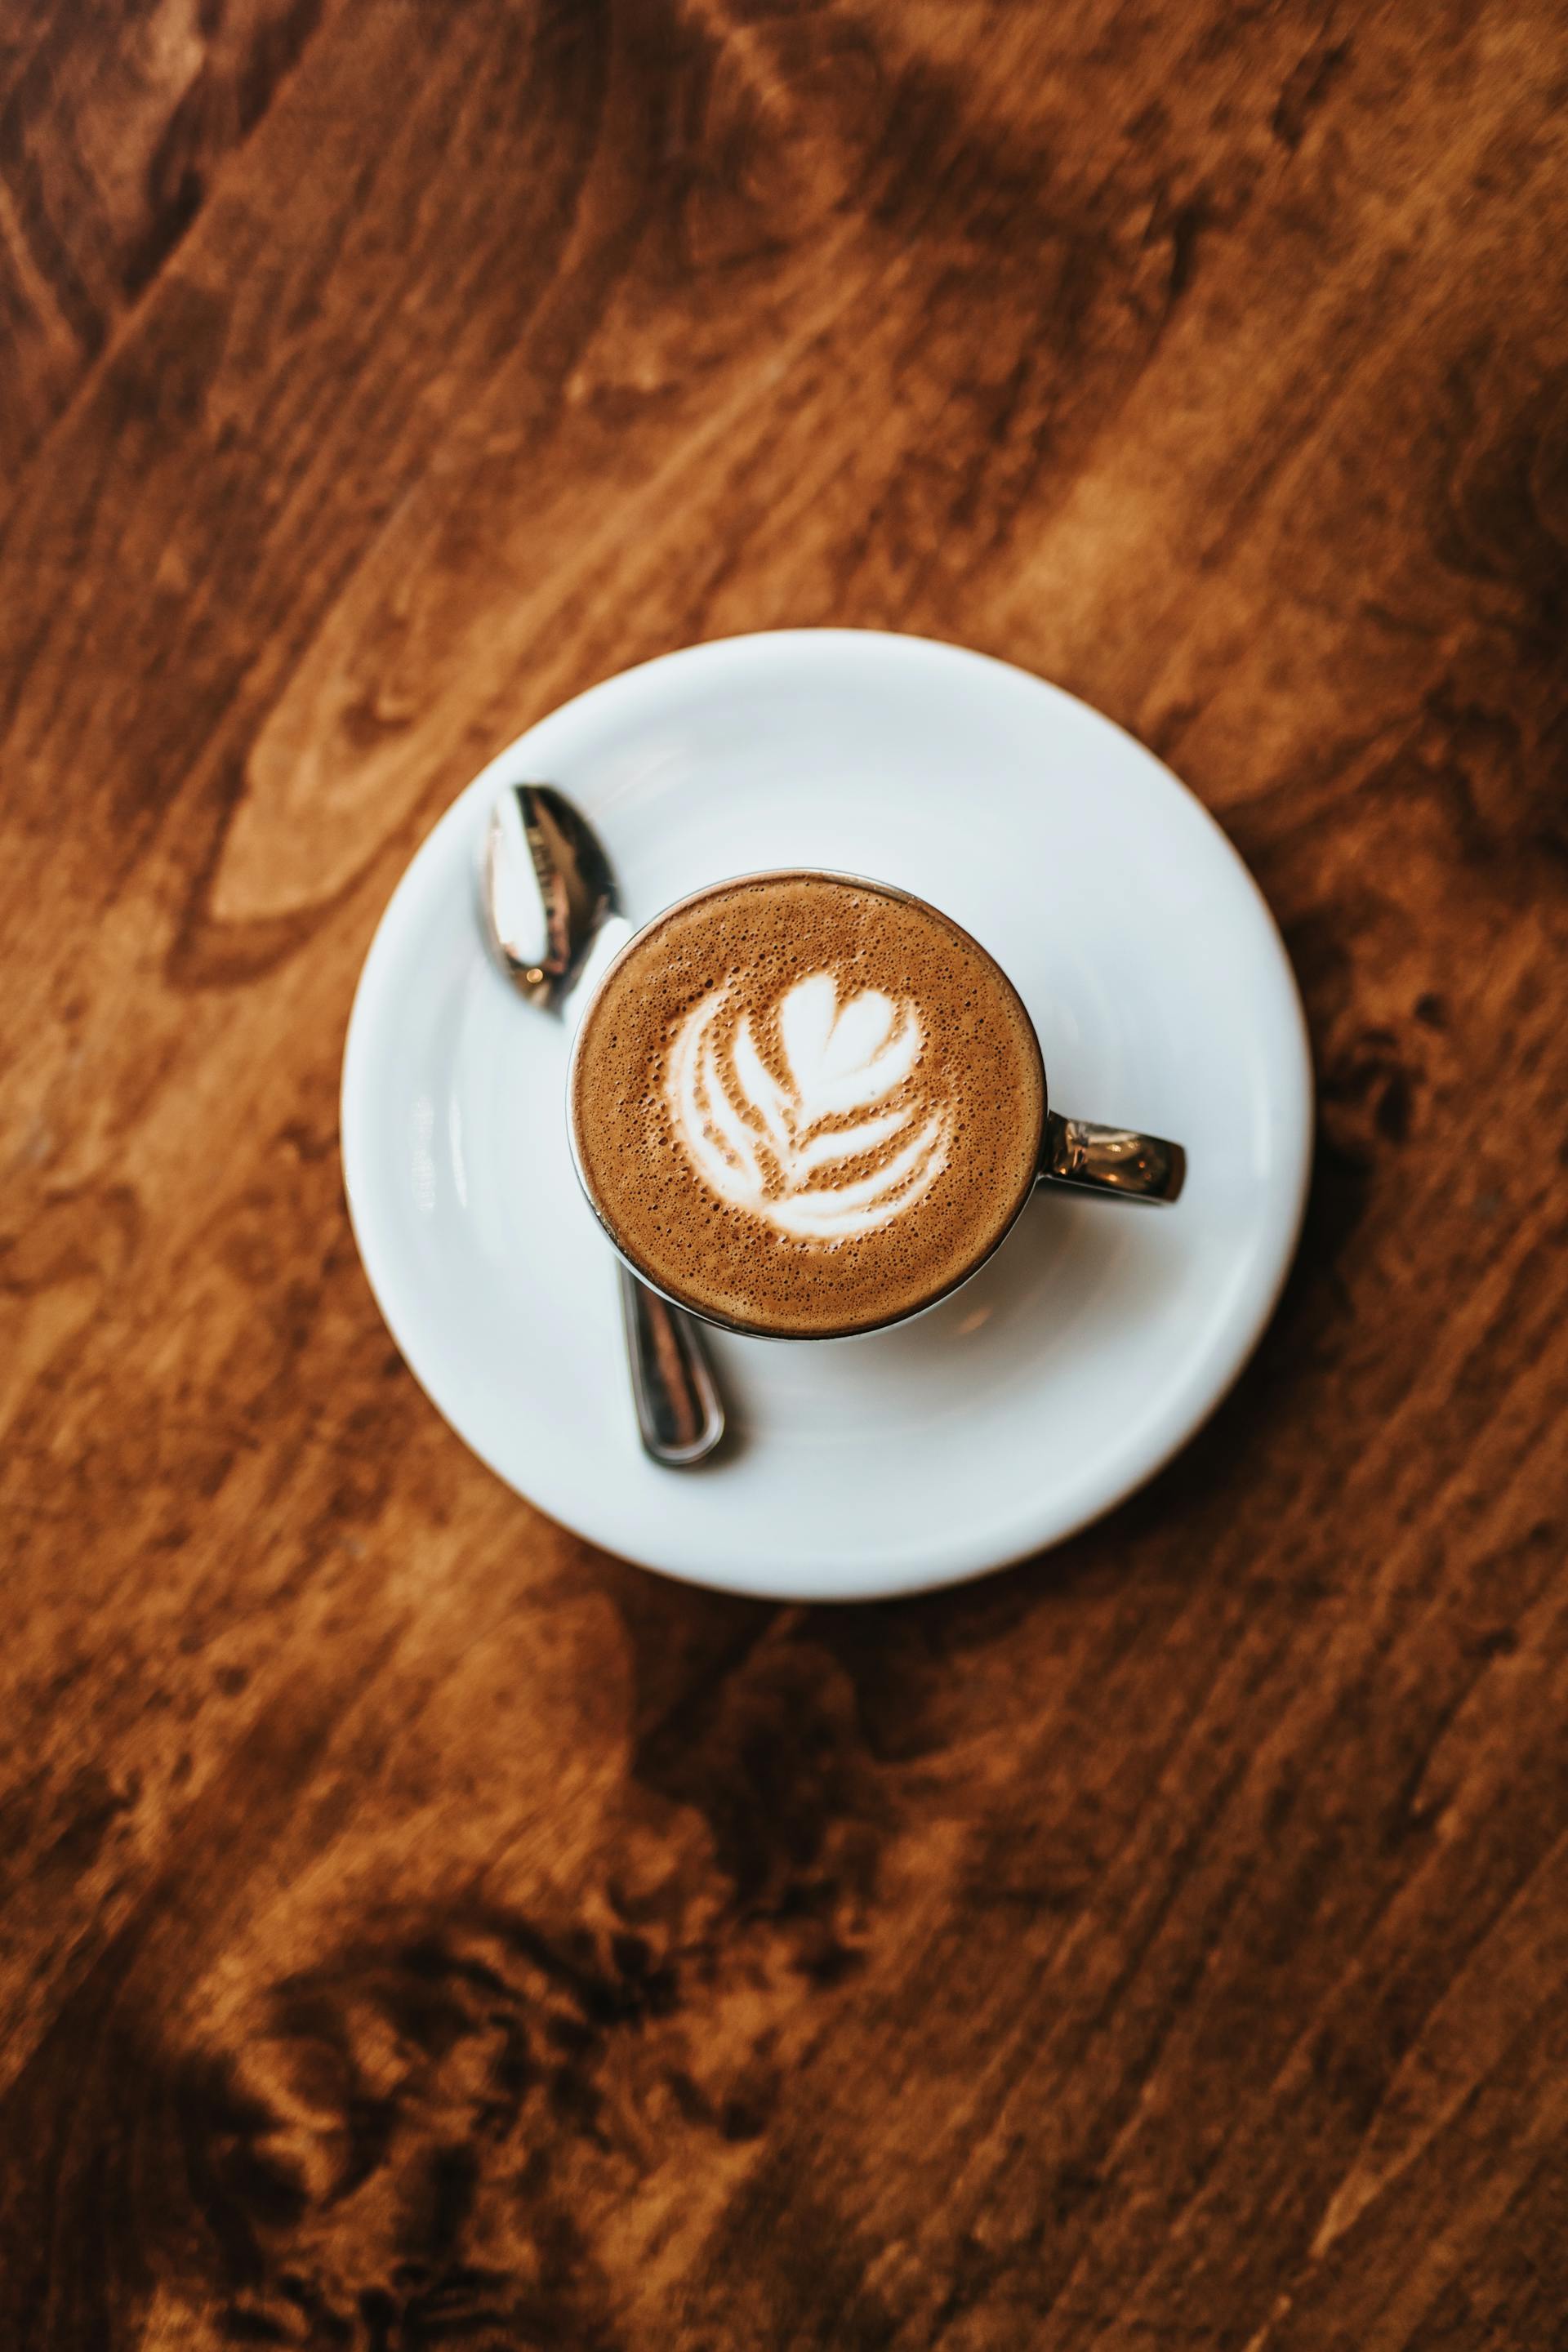 A cup of coffee on a table | Source: Pexels